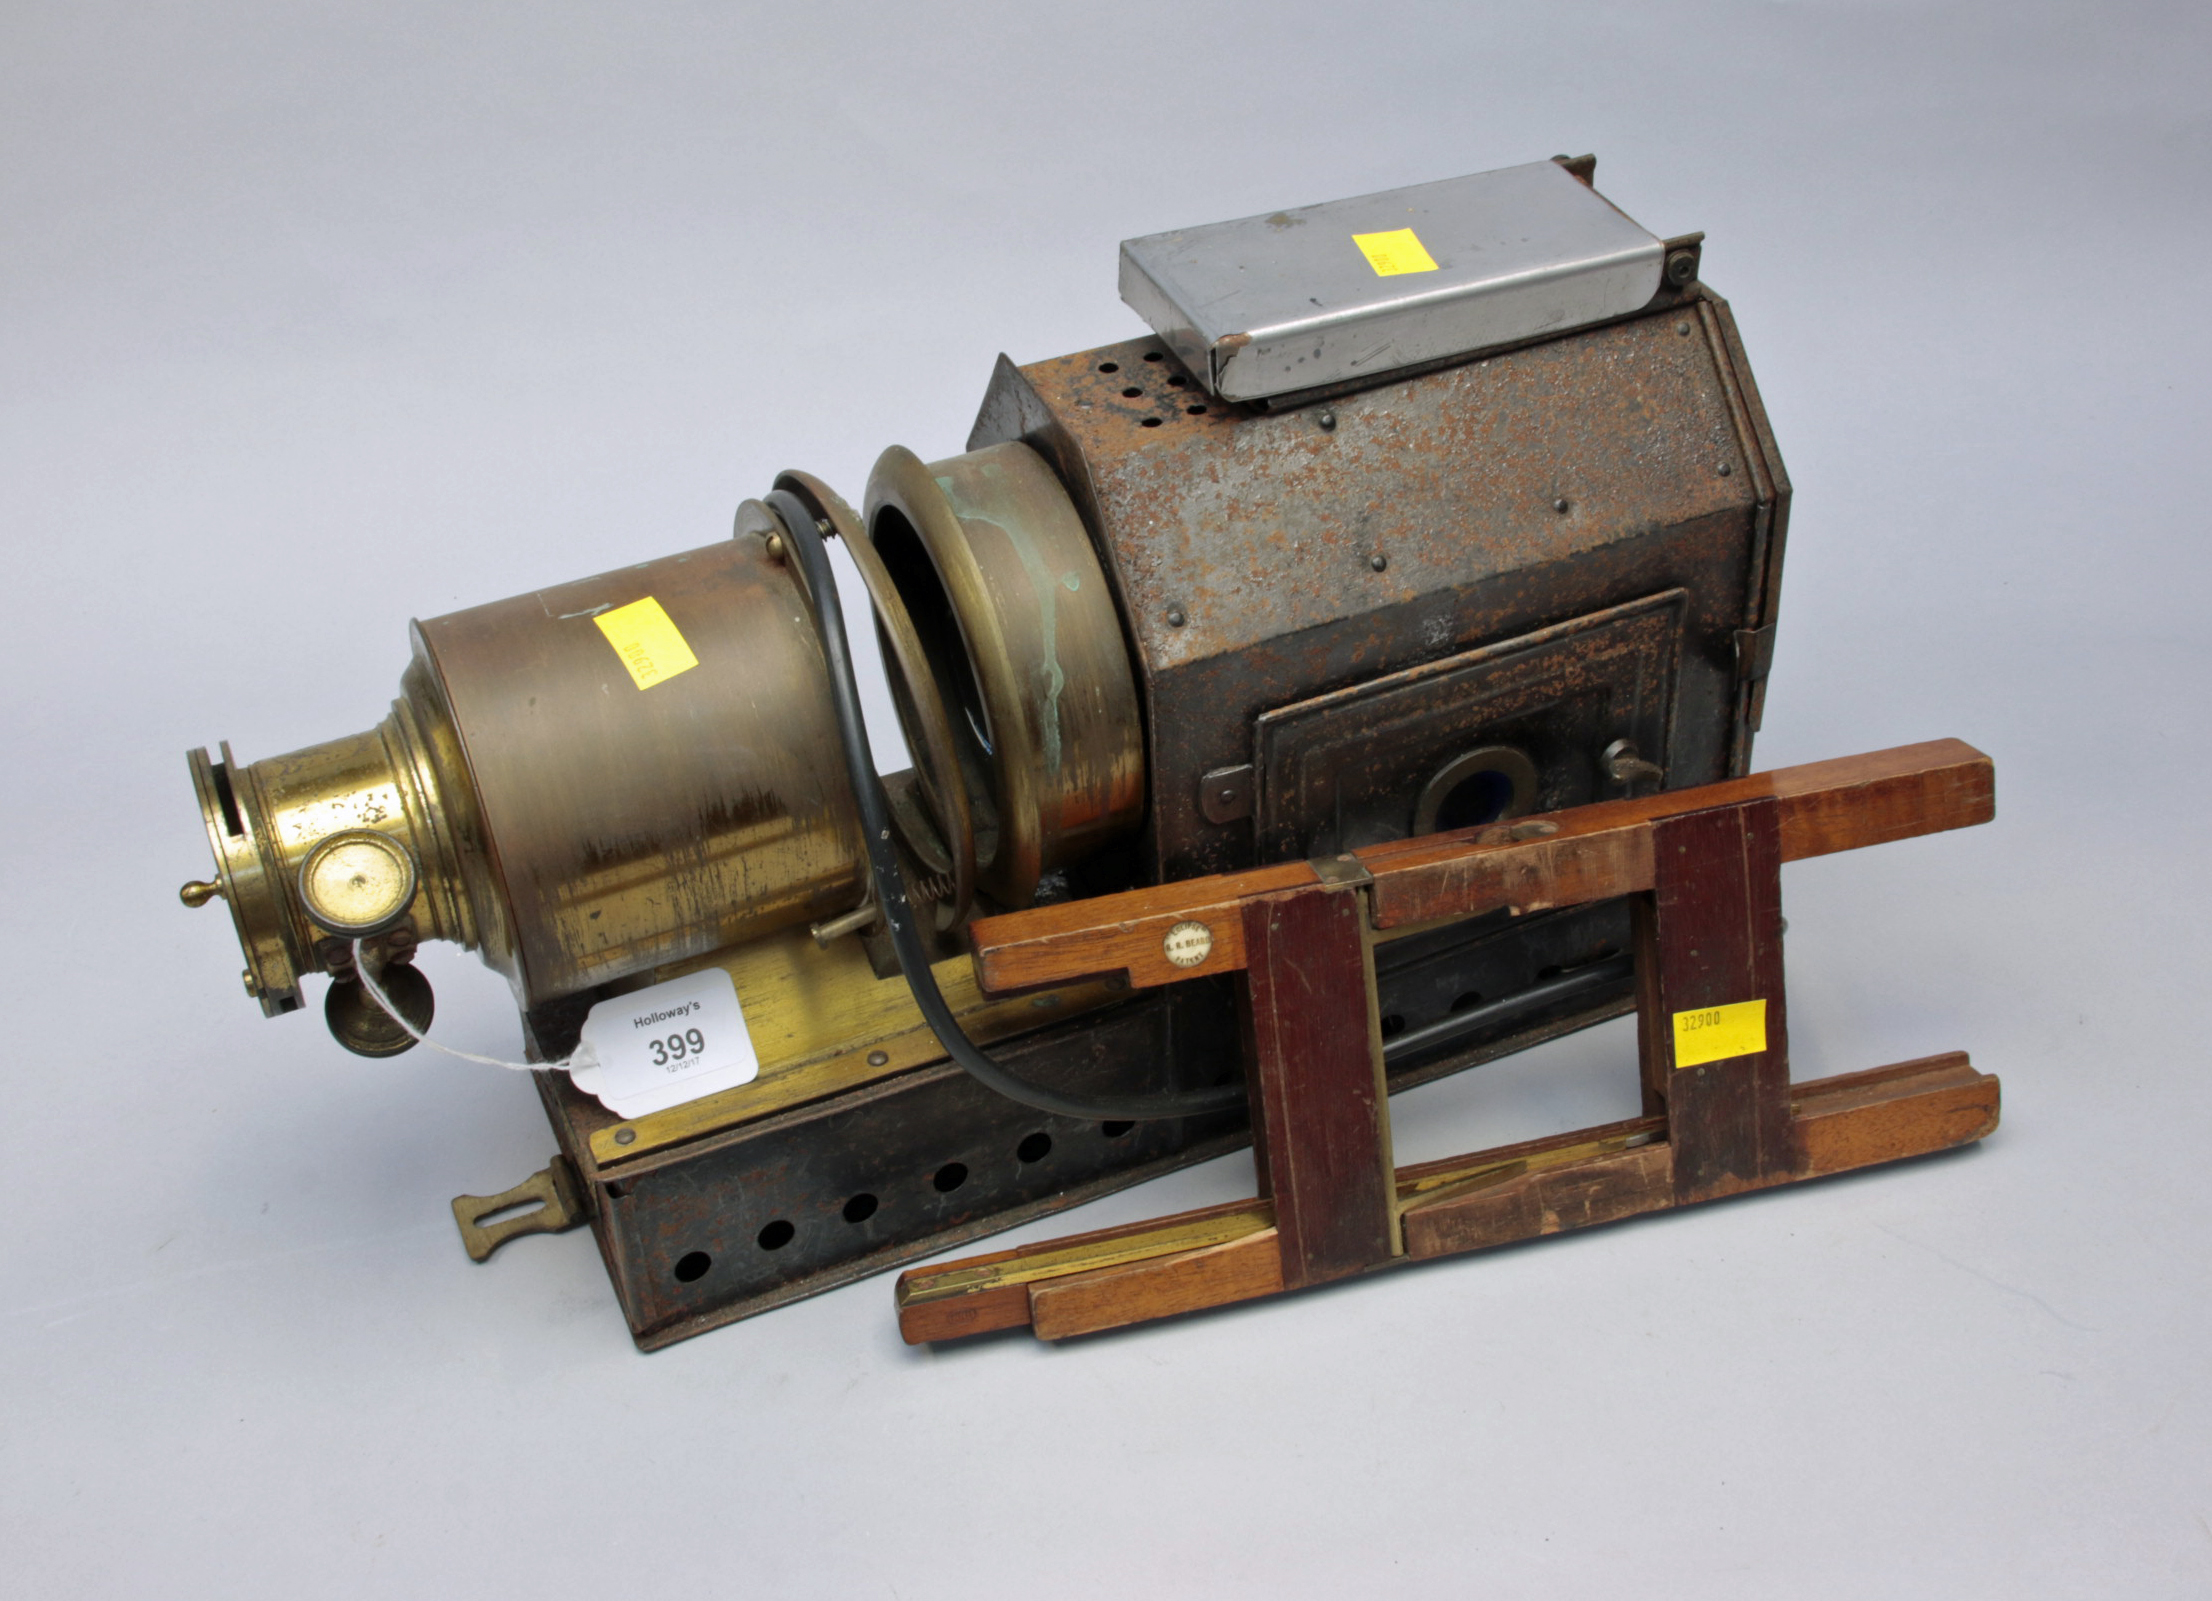 Riley Brothers, Bradford, a late 19th century magic lantern, 'The Praestantia' converted for